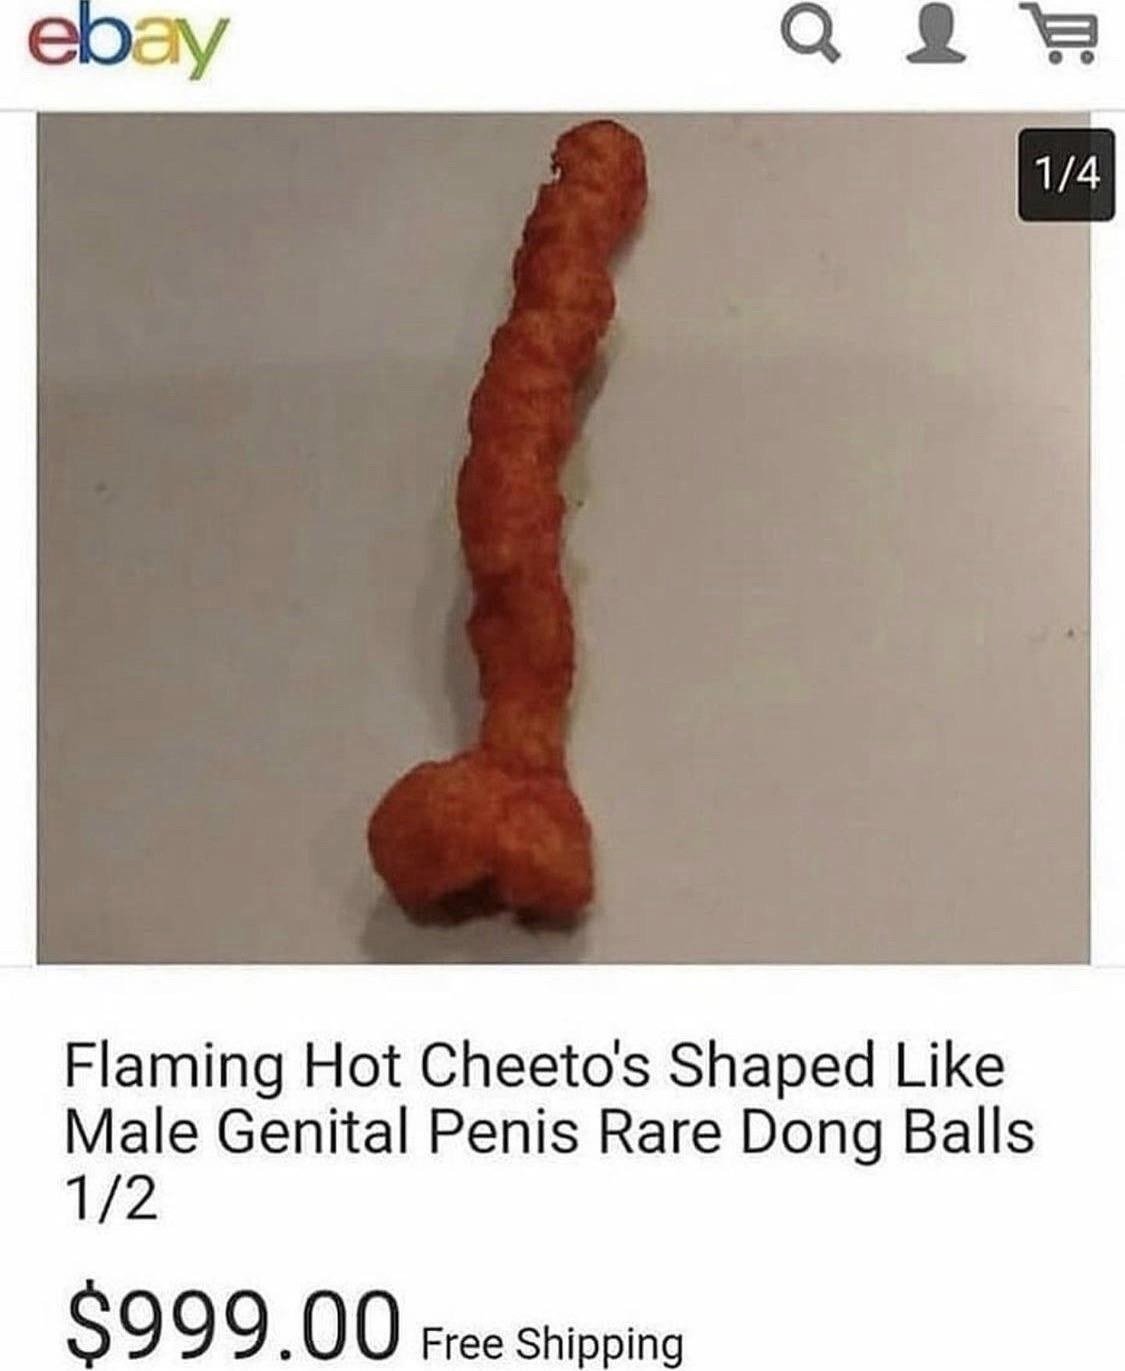 Cheeto &quot;shaped like male genital penis rare dong balls&quot; selling for $999, with free shipping